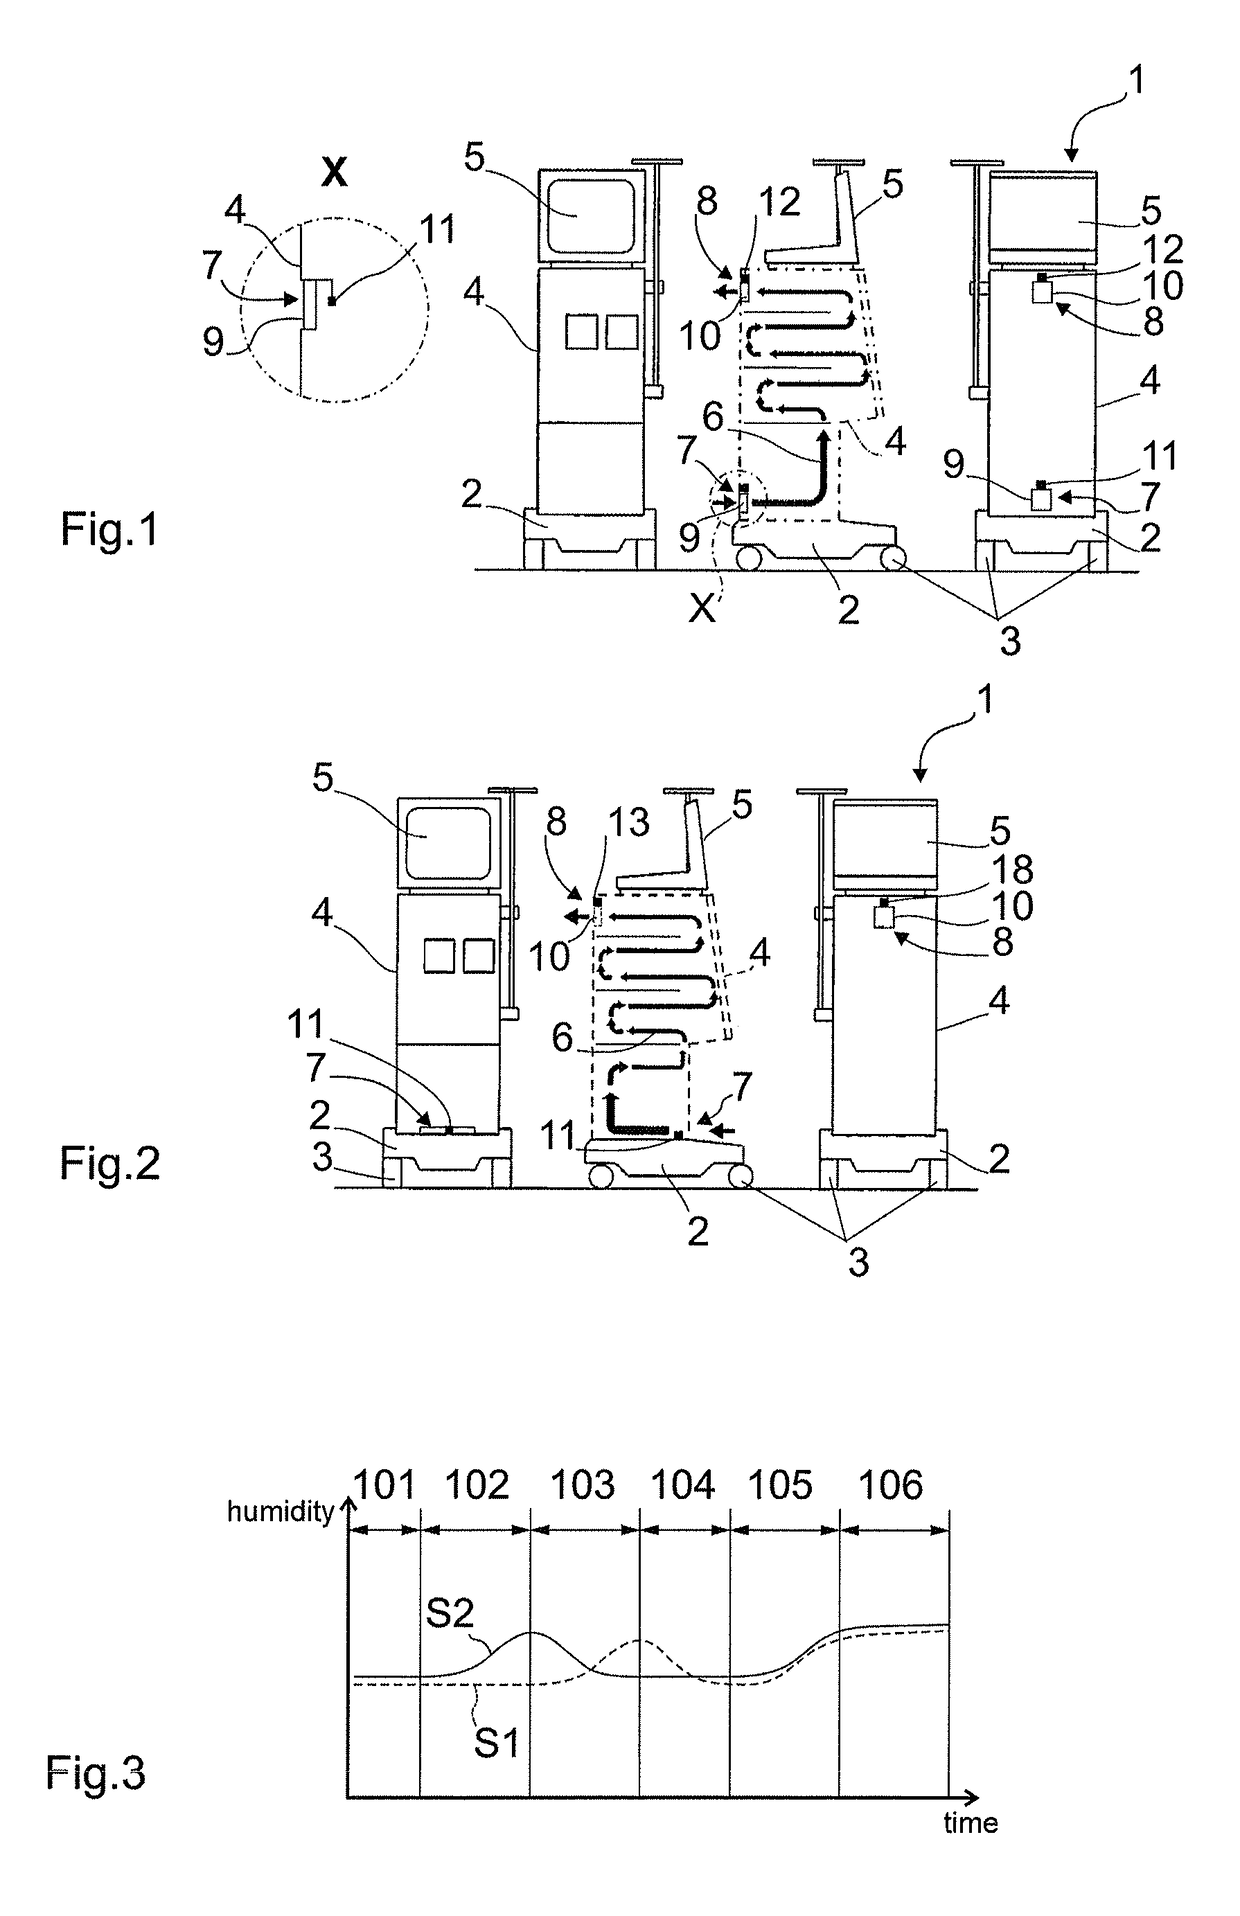 Extracorporeal blood treatment machine comprising leakage detection and method of detecting leakages in dialysis fluid systems